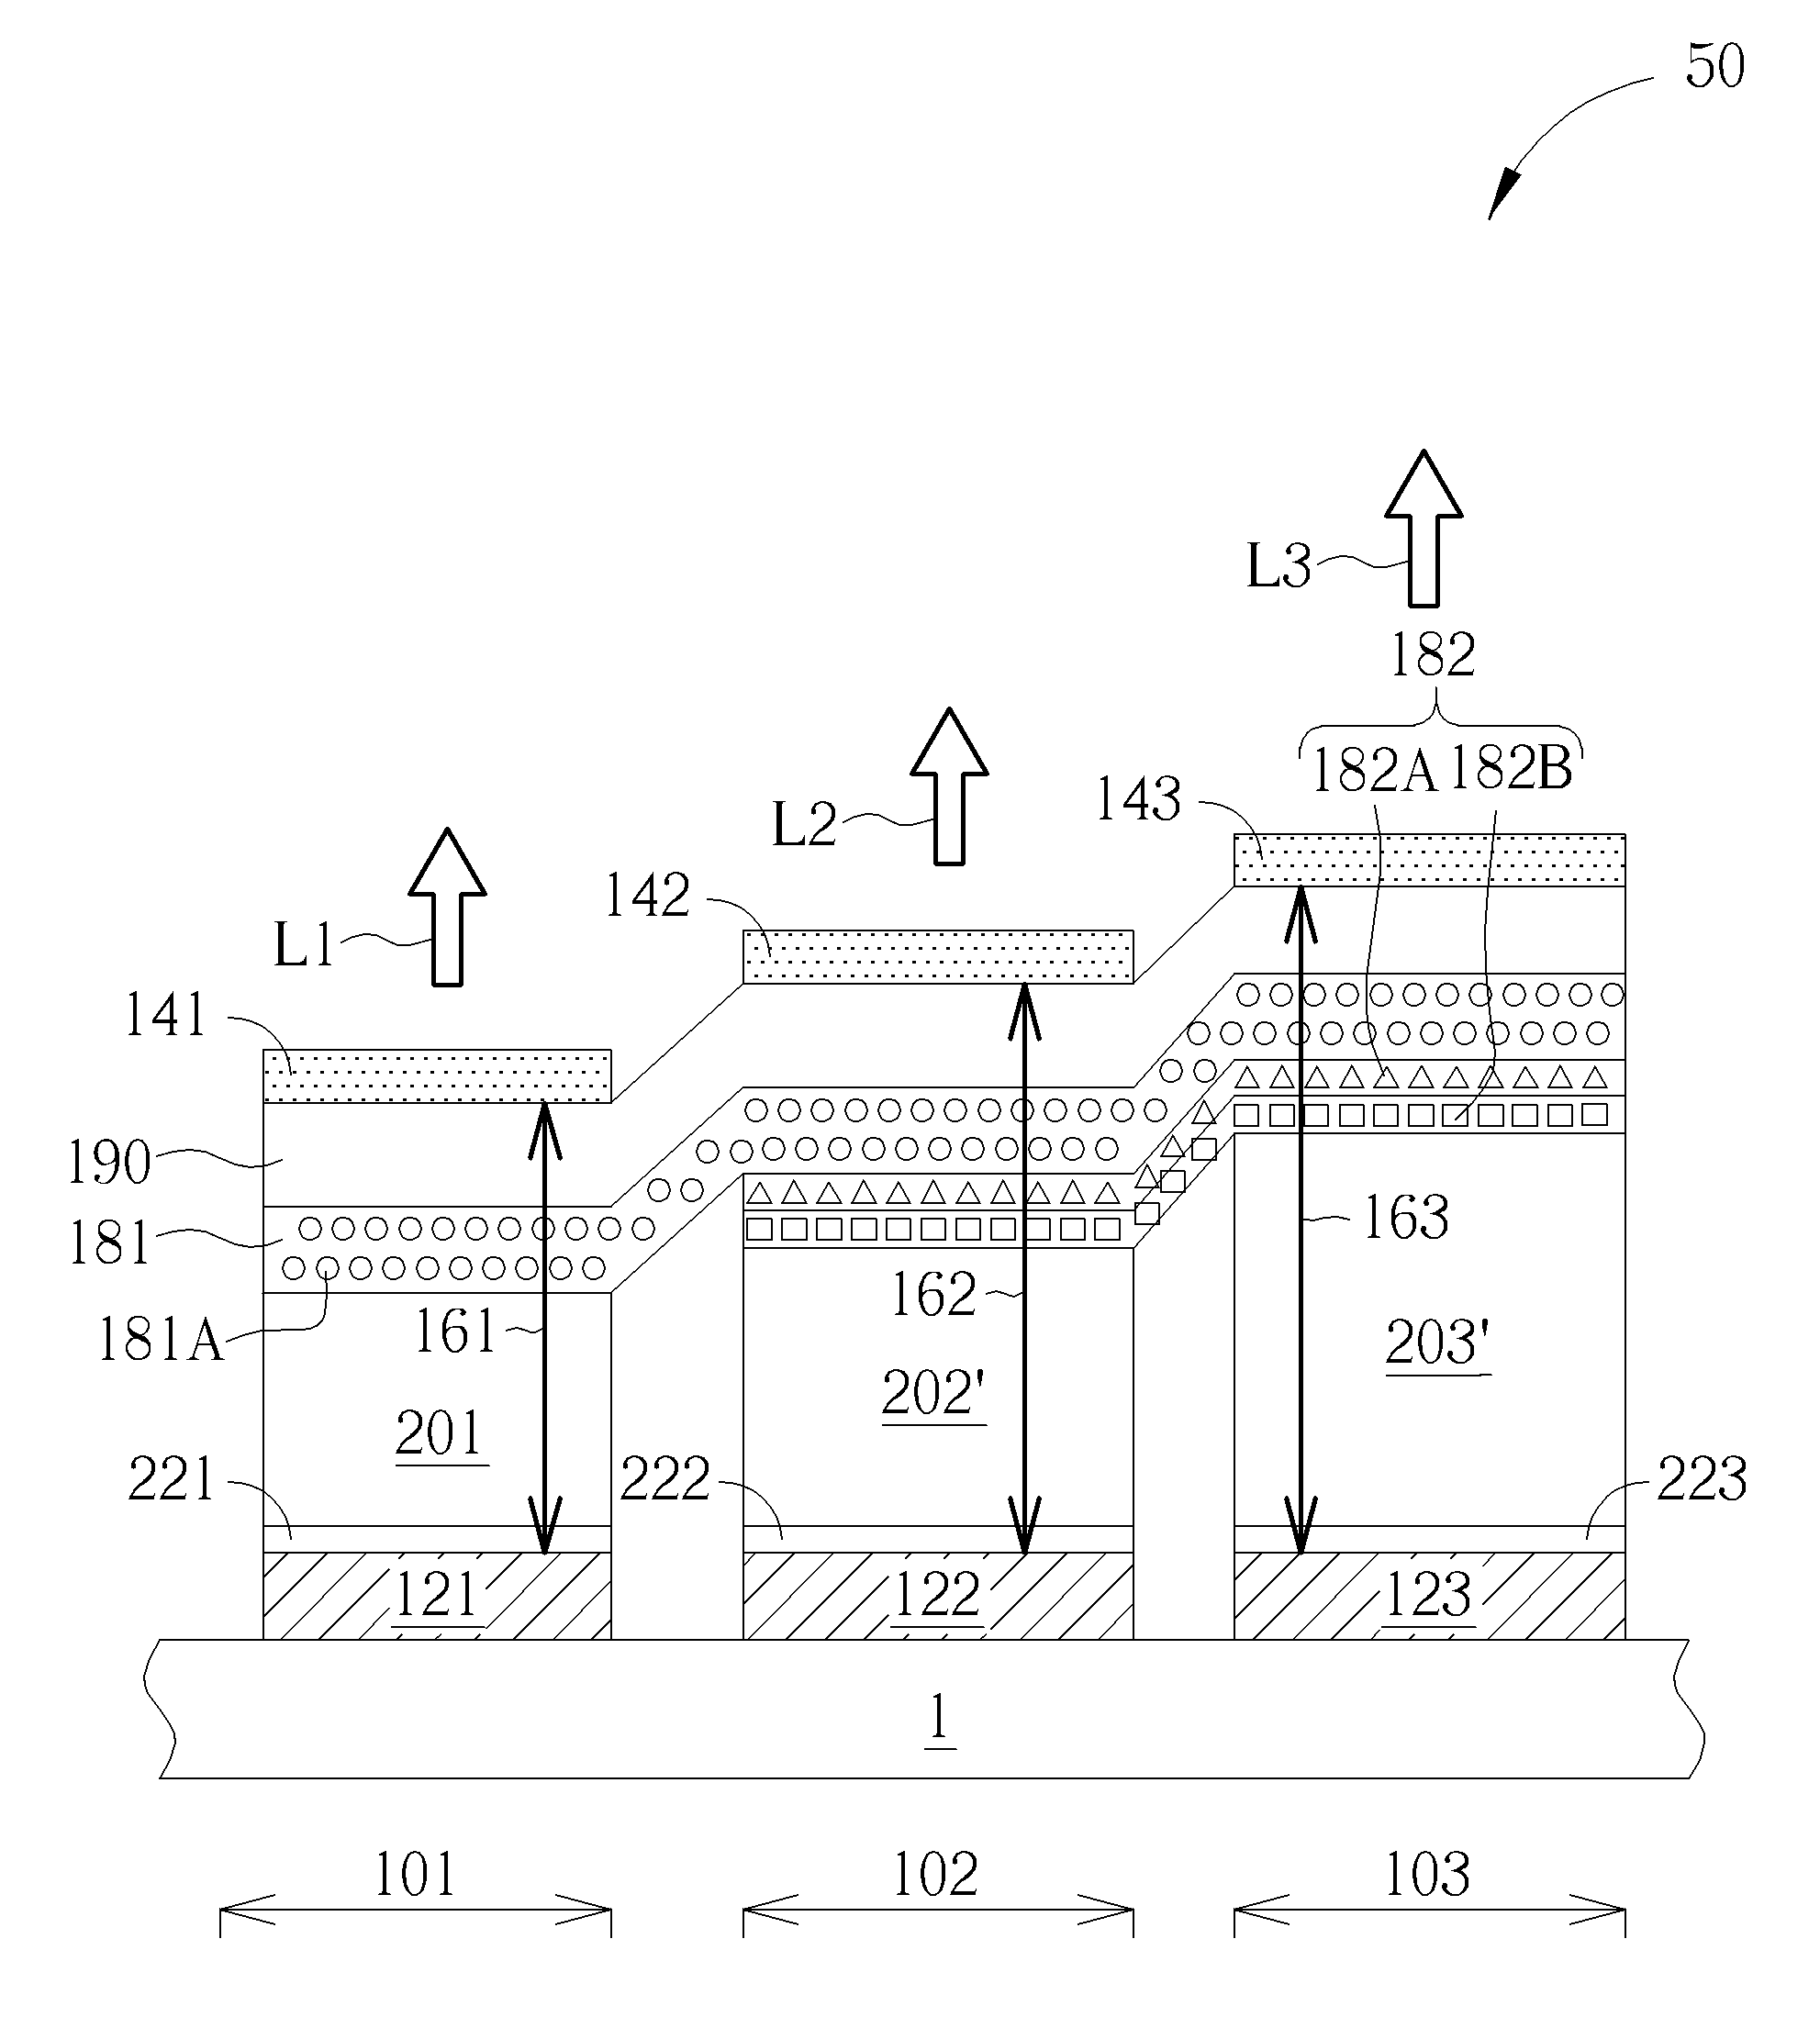 Pixel structure of electroluminescent display panel